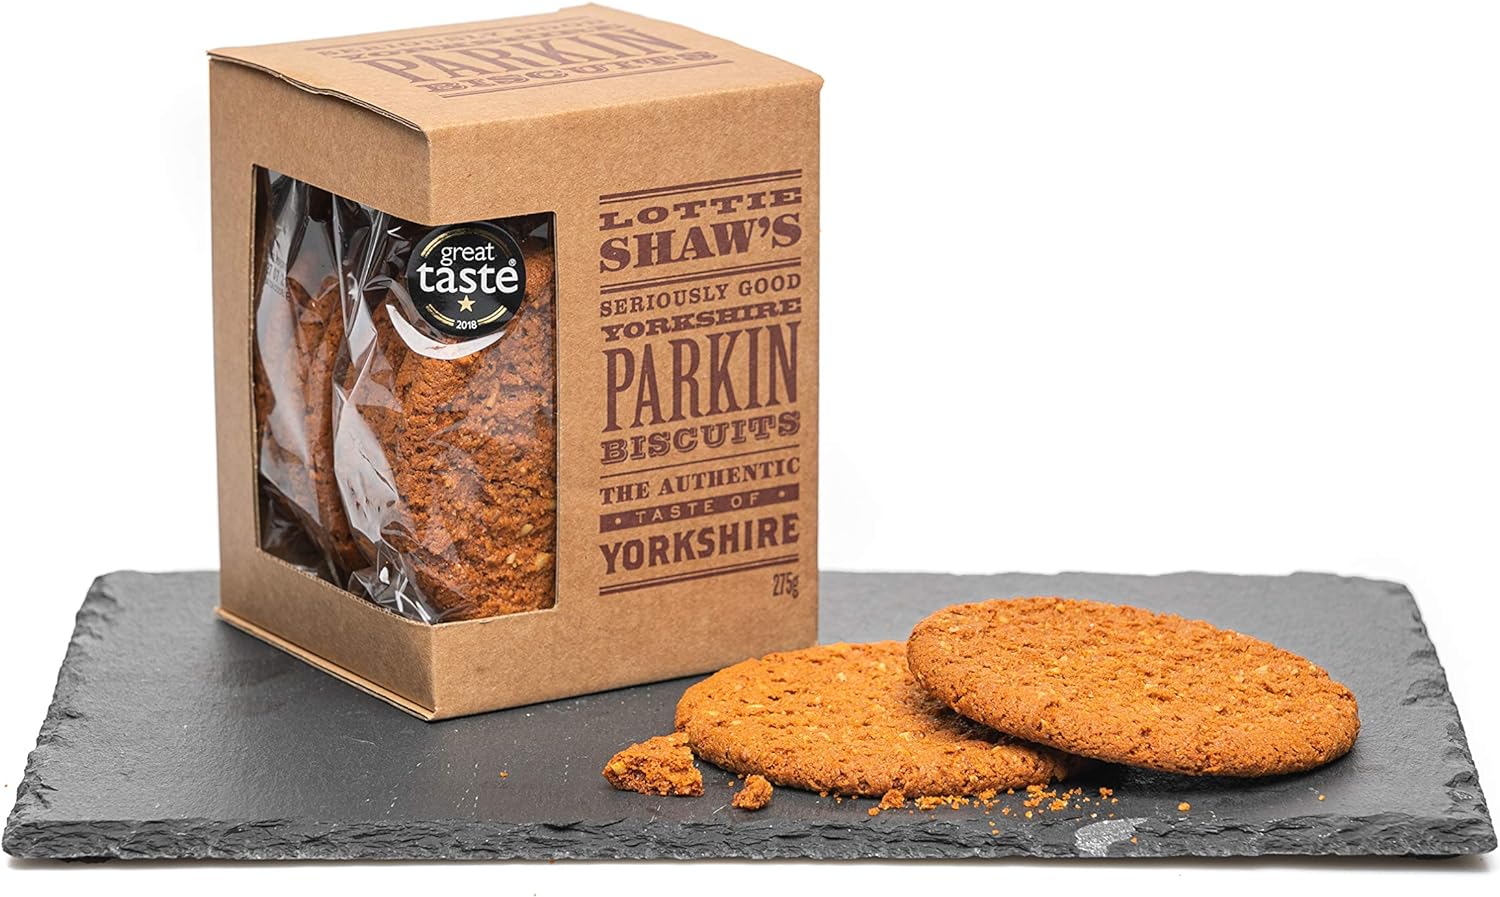 Image name yorkshire parkin biscuits the 4 image from the post Yorkshire Black Friday Deals in Yorkshire.com.